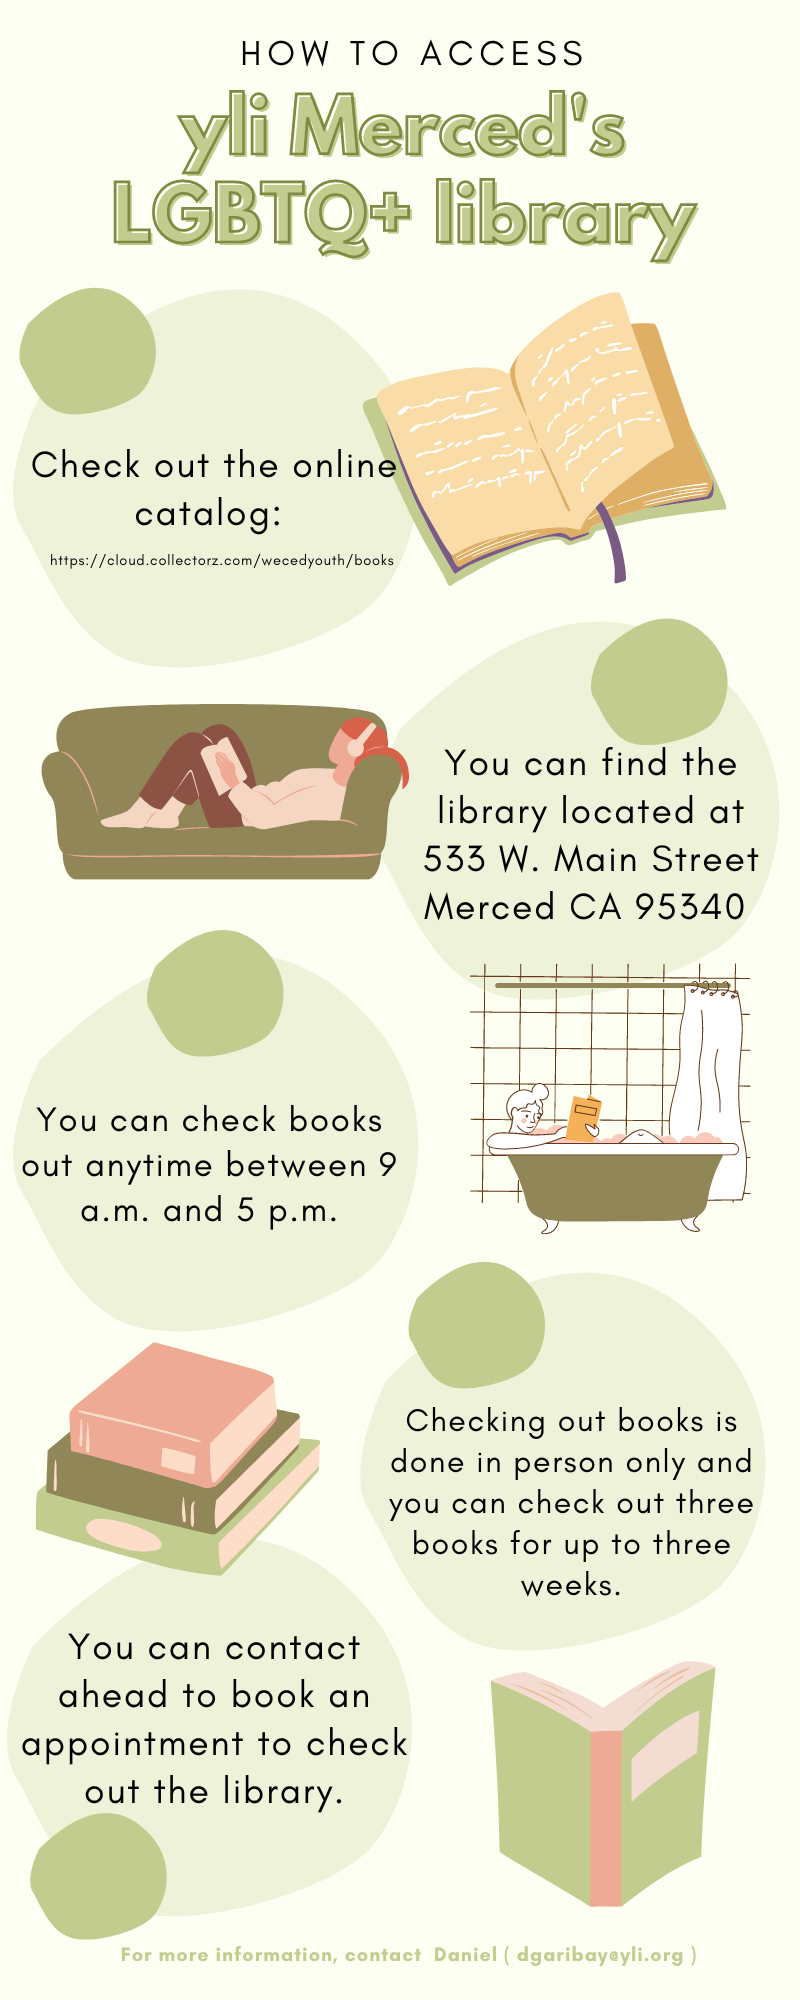 an infographic that outlines how to check out books from yli Merced's LGBTQ+ library